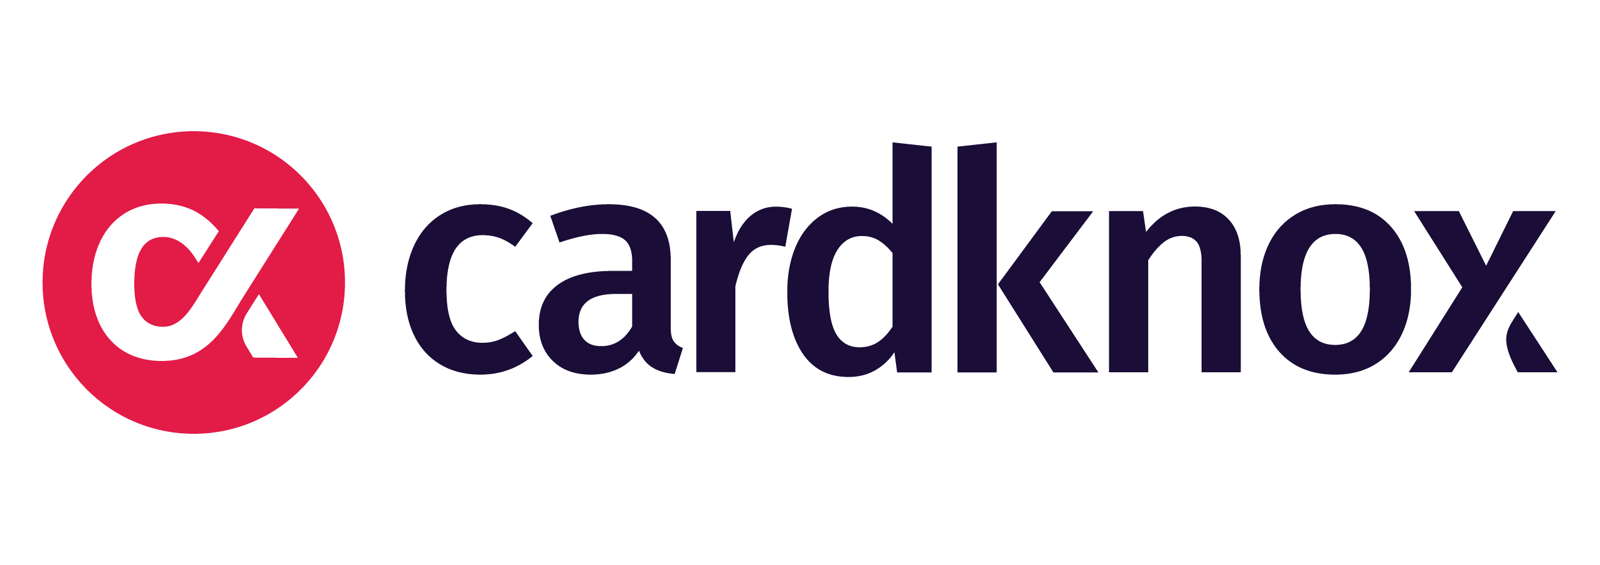 Cardknox - Payment module - nopCommerce